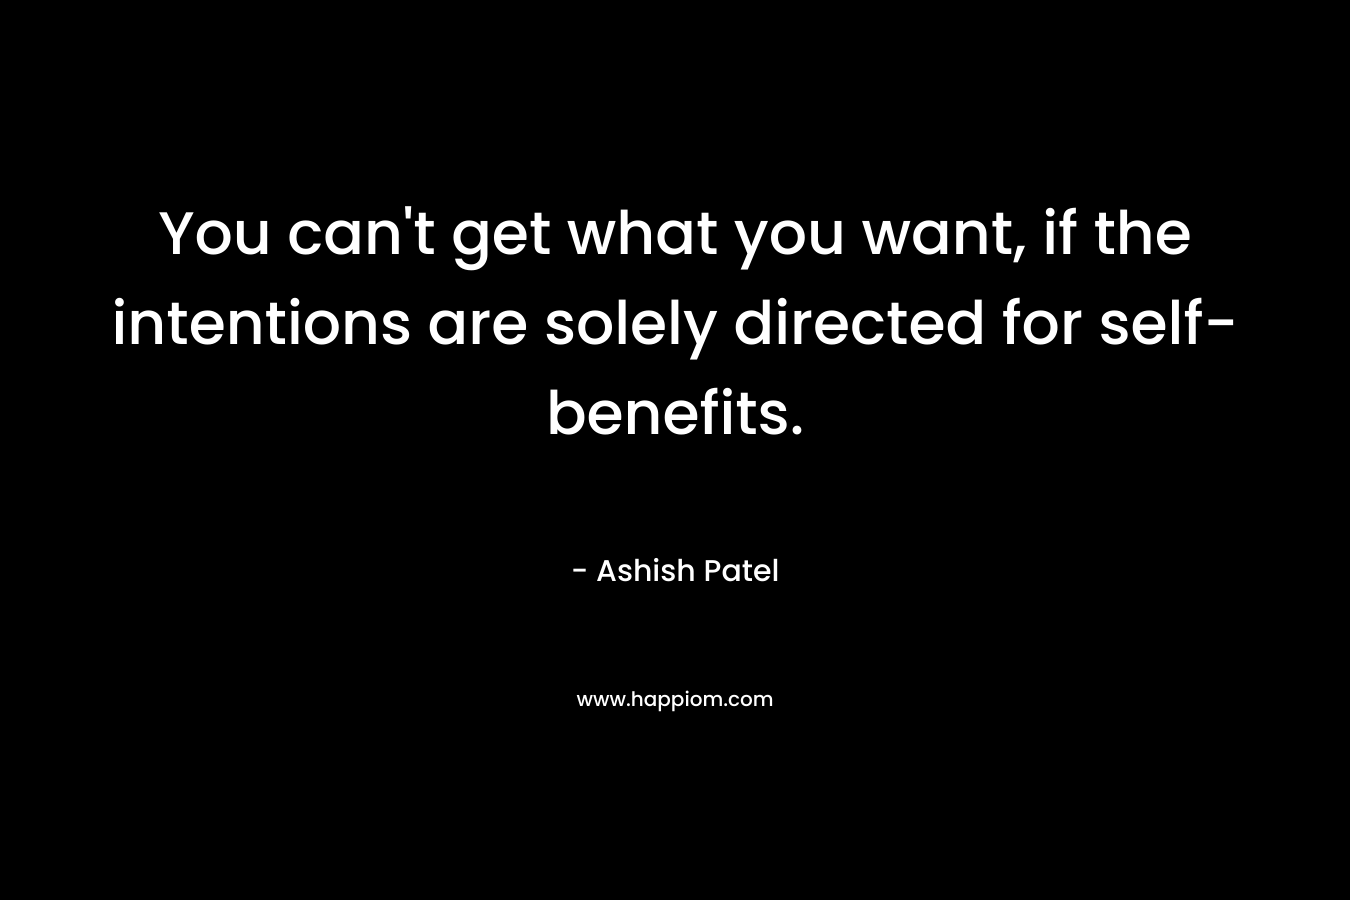 You can’t get what you want, if the intentions are solely directed for self-benefits. – Ashish Patel